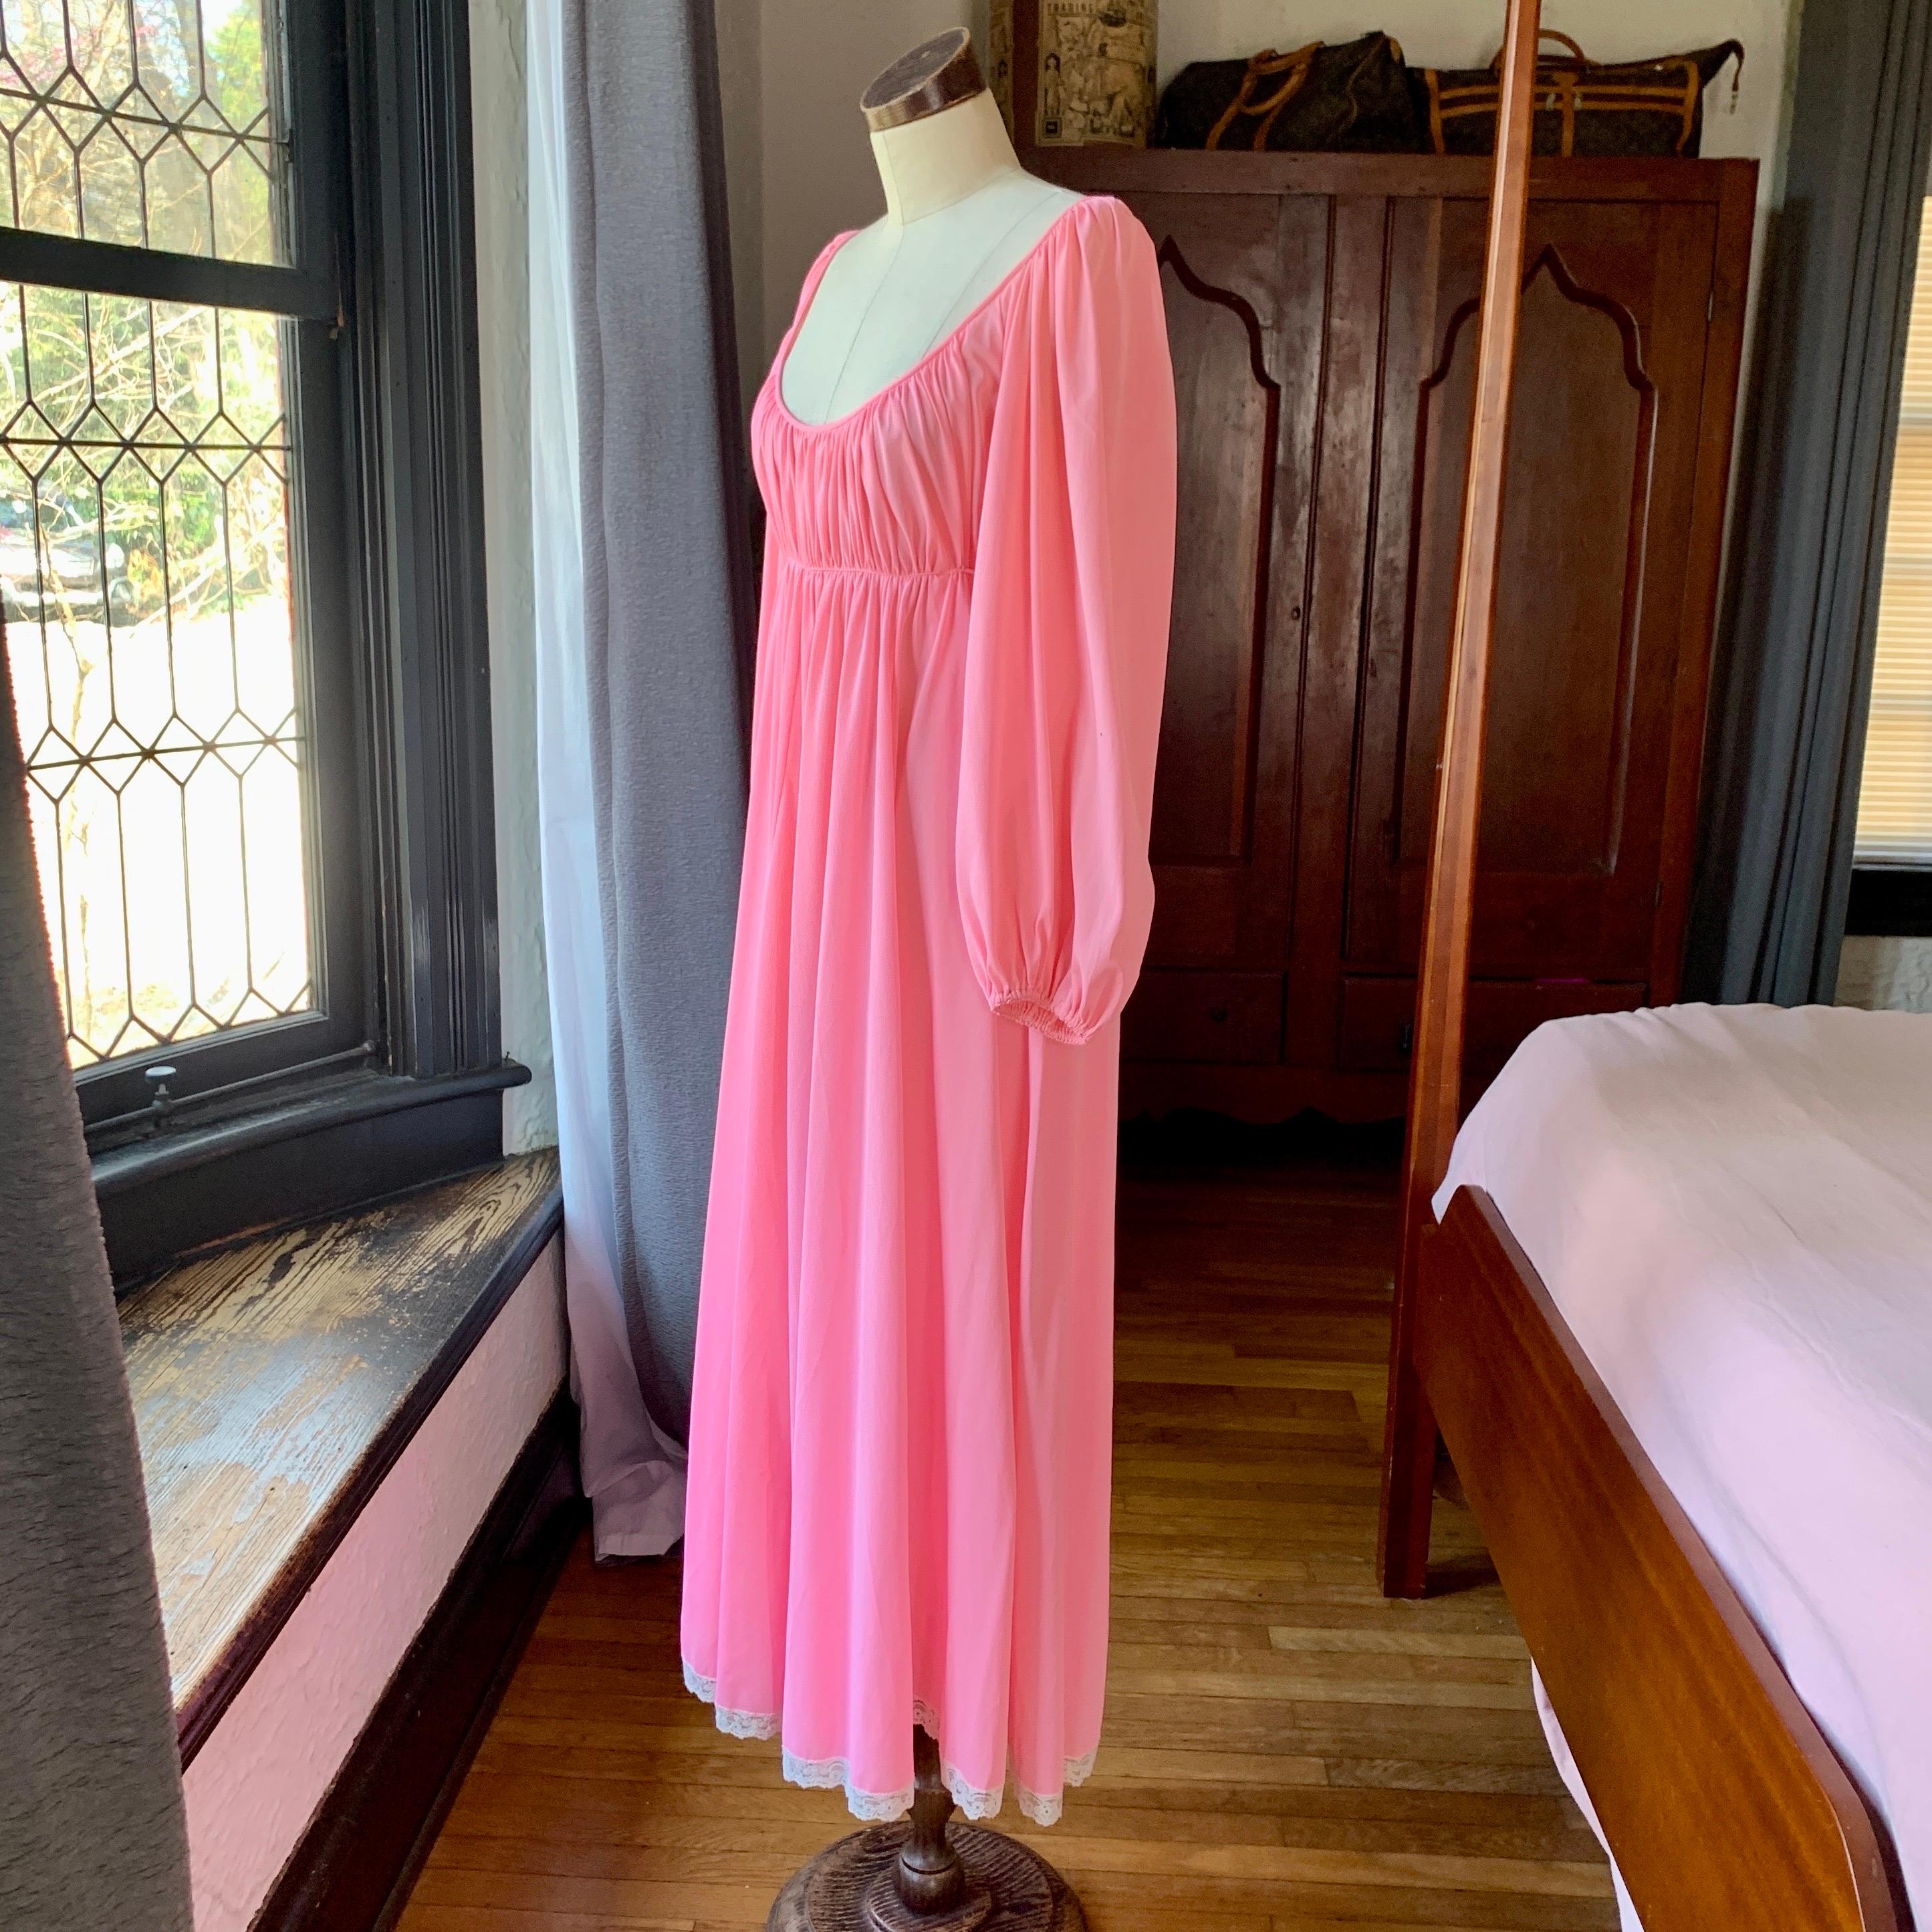 Claire Sandra by Lucie Ann, Beverly Hills, Maxi Style Nightgown, Off Shoulder, Butter Soft Nylon, Tie In Back to Cinch Waist, Pleated Front, Balloon Sleeves, Size 36

Measurements Laying Flat 
Bust 20